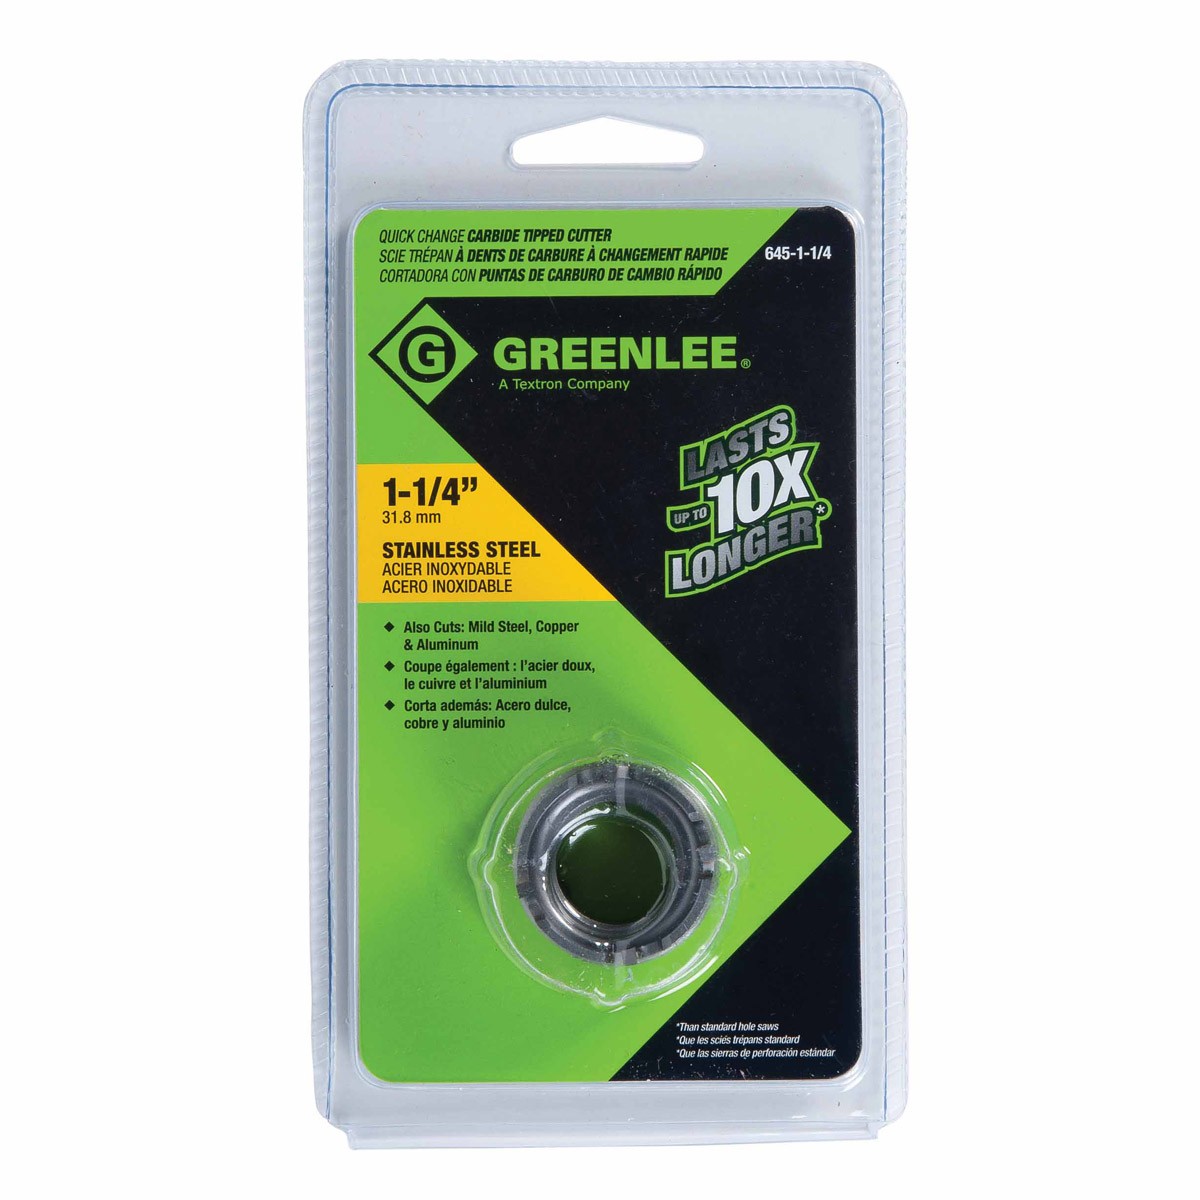 Greenlee 645-1-1/4 1-1/4" Quick Change Stainless Steel Carbide-Tipped Hole Cutter